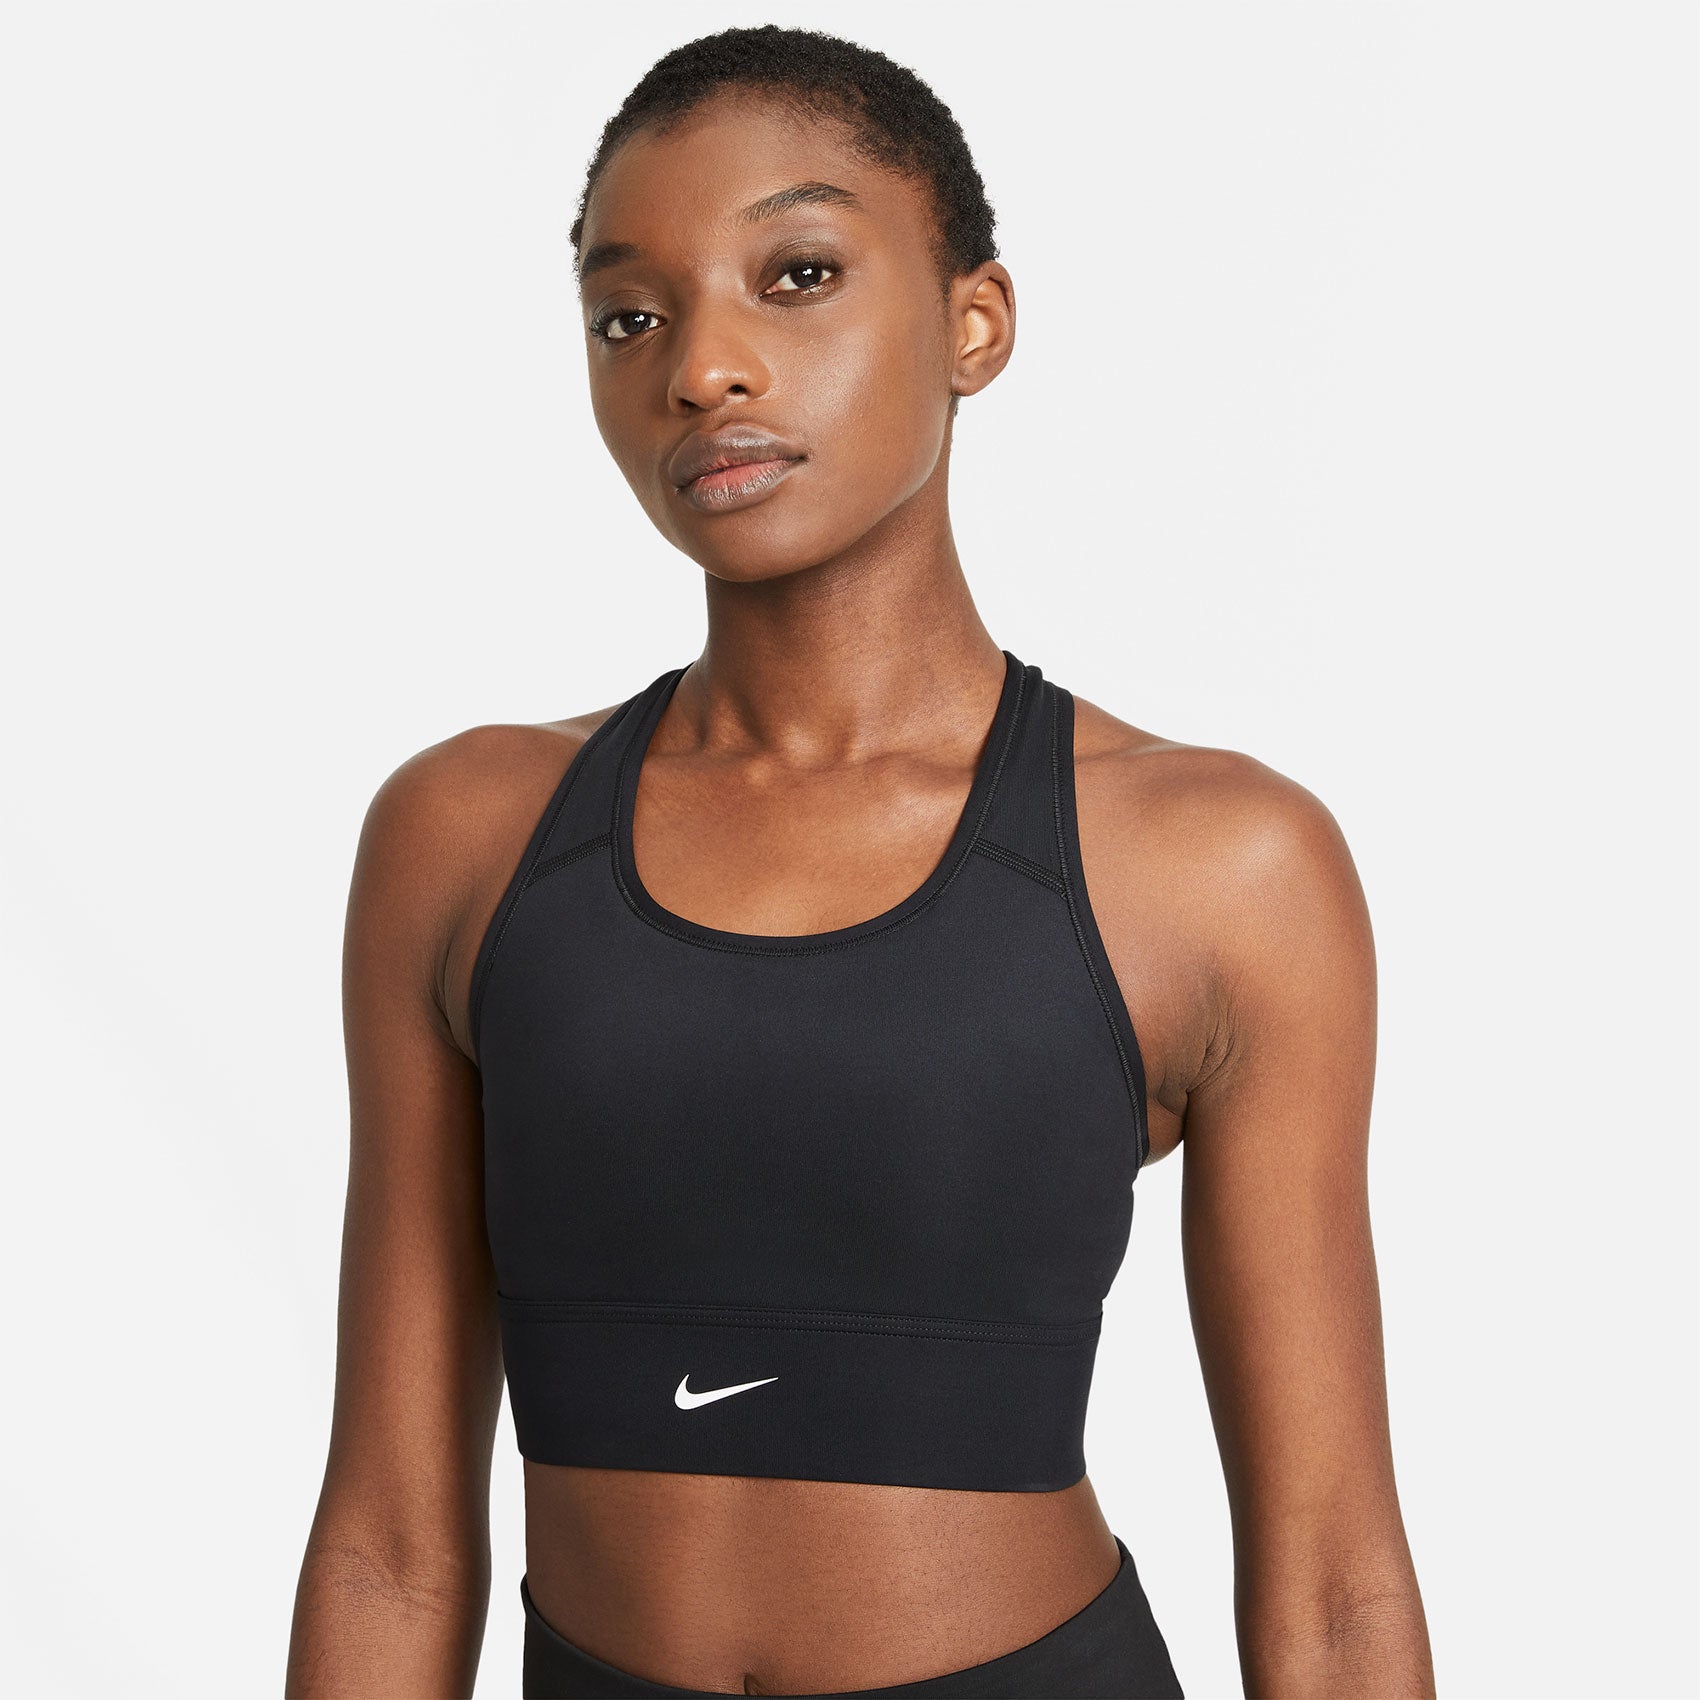 rebel sport - A fit like no other! Check out the new sports bra